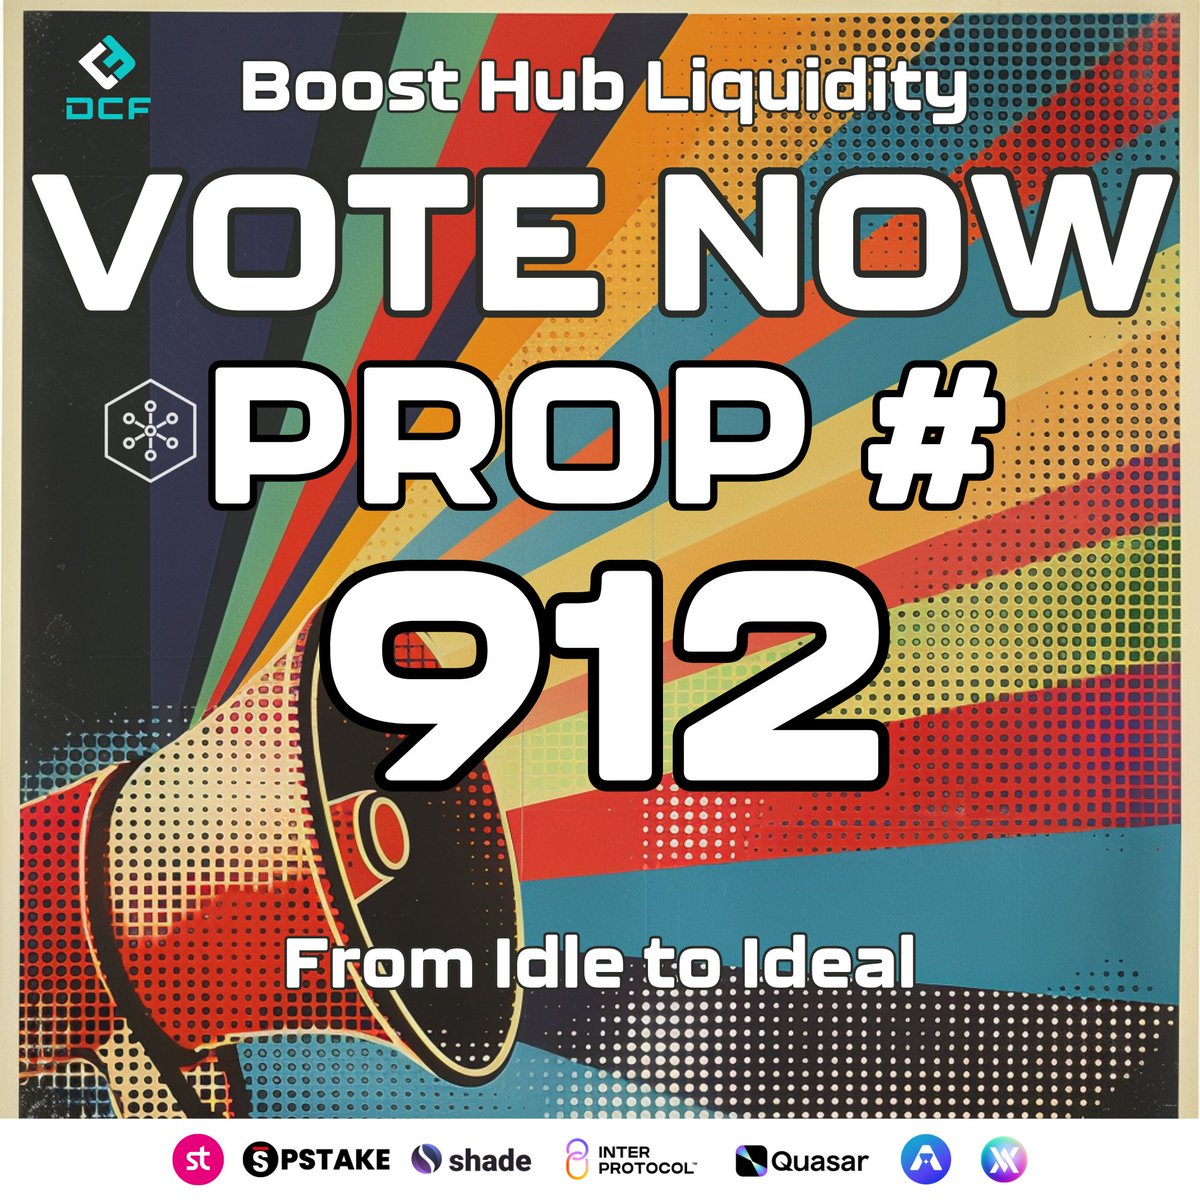 🚨Prop #912 is set to unlock new levels of liquidity across the @cosmos. Voting is live. Get over and cast your vote now. Need more info on why the proposal is a win-win-win? Let's have a review. 👇 @DCF_io @cosmoshub Prop #912 is the spending proposal followup to signaling…